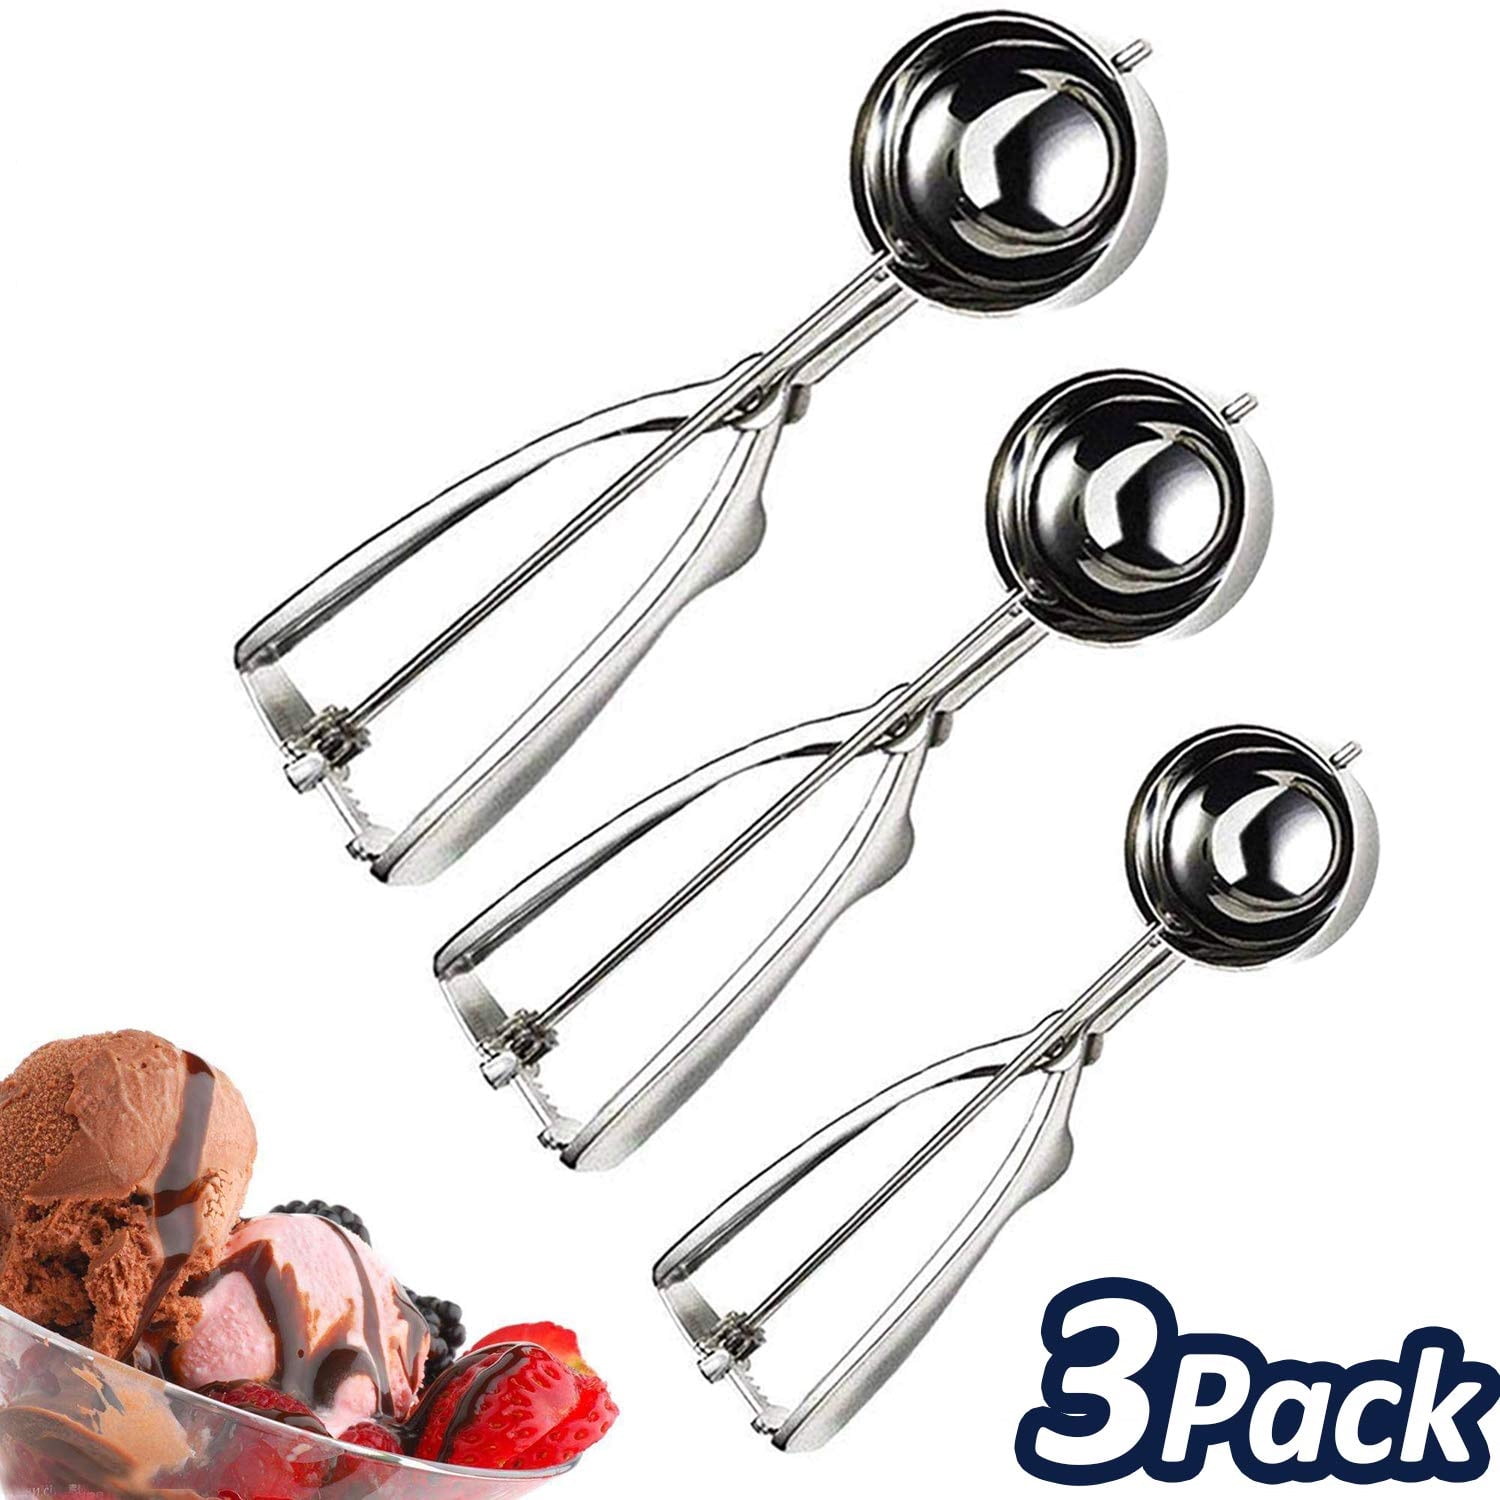 Stainless Steel Durable Ice Cream Cookie Dough Scooper for Baking Small Medium Large Size 1 1.5 2 Tablespoon Cookie Scoops Set of 3 